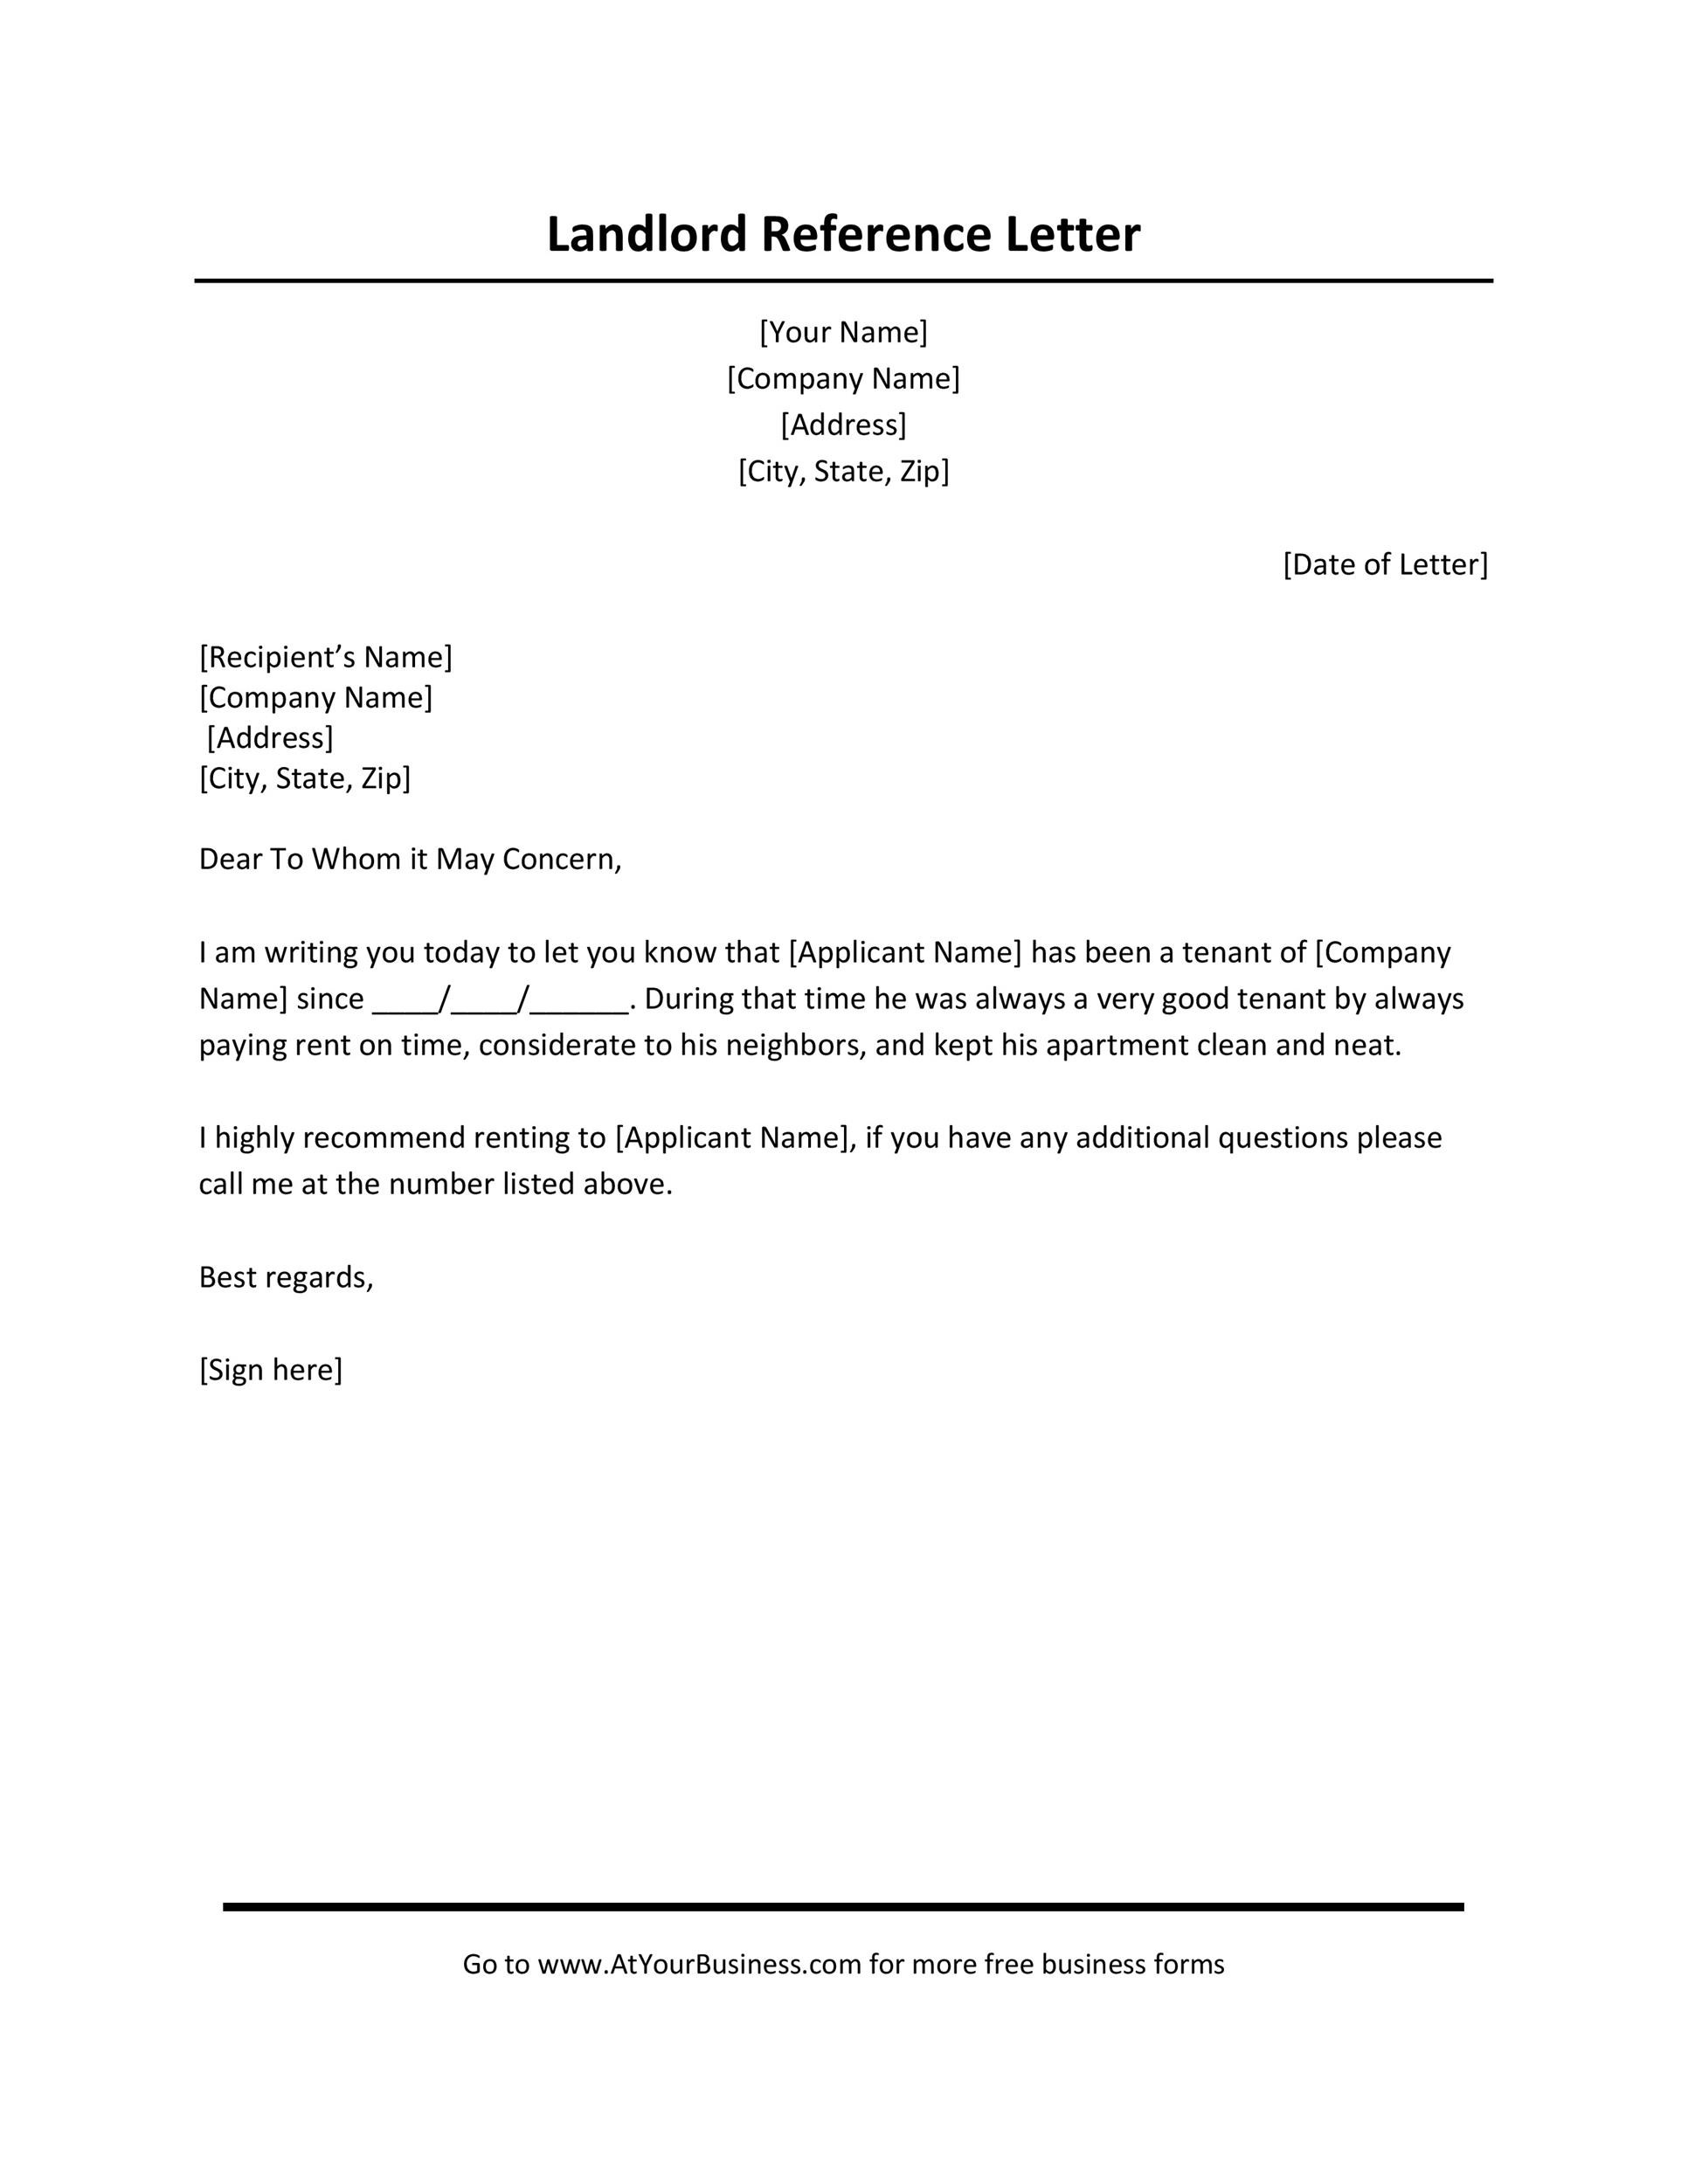 Free Rental Reference Letter Template